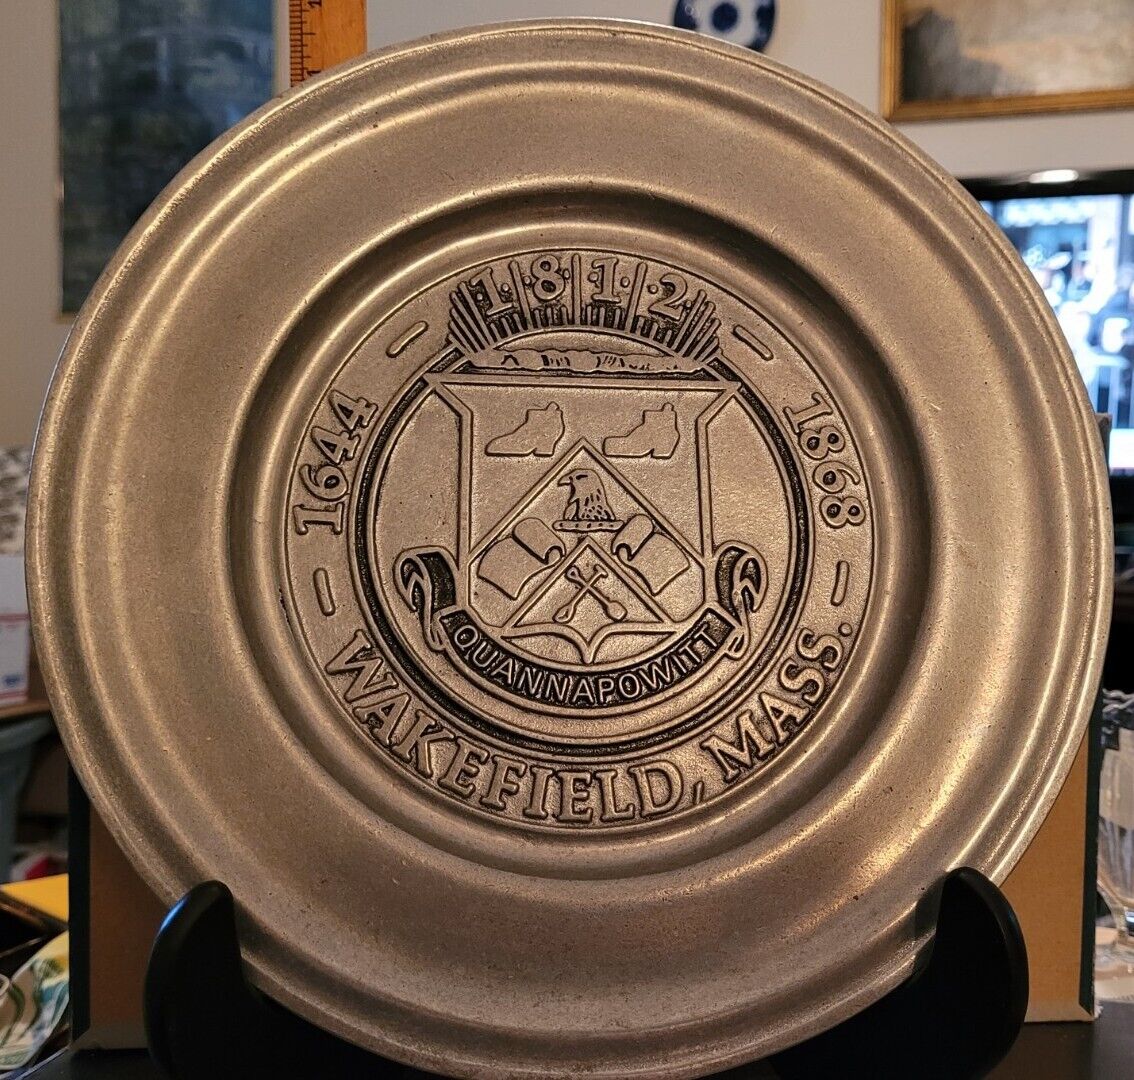 Vintage Commemorative Pewter Plate Wakefield Massachusetts Made By Carson Pewter